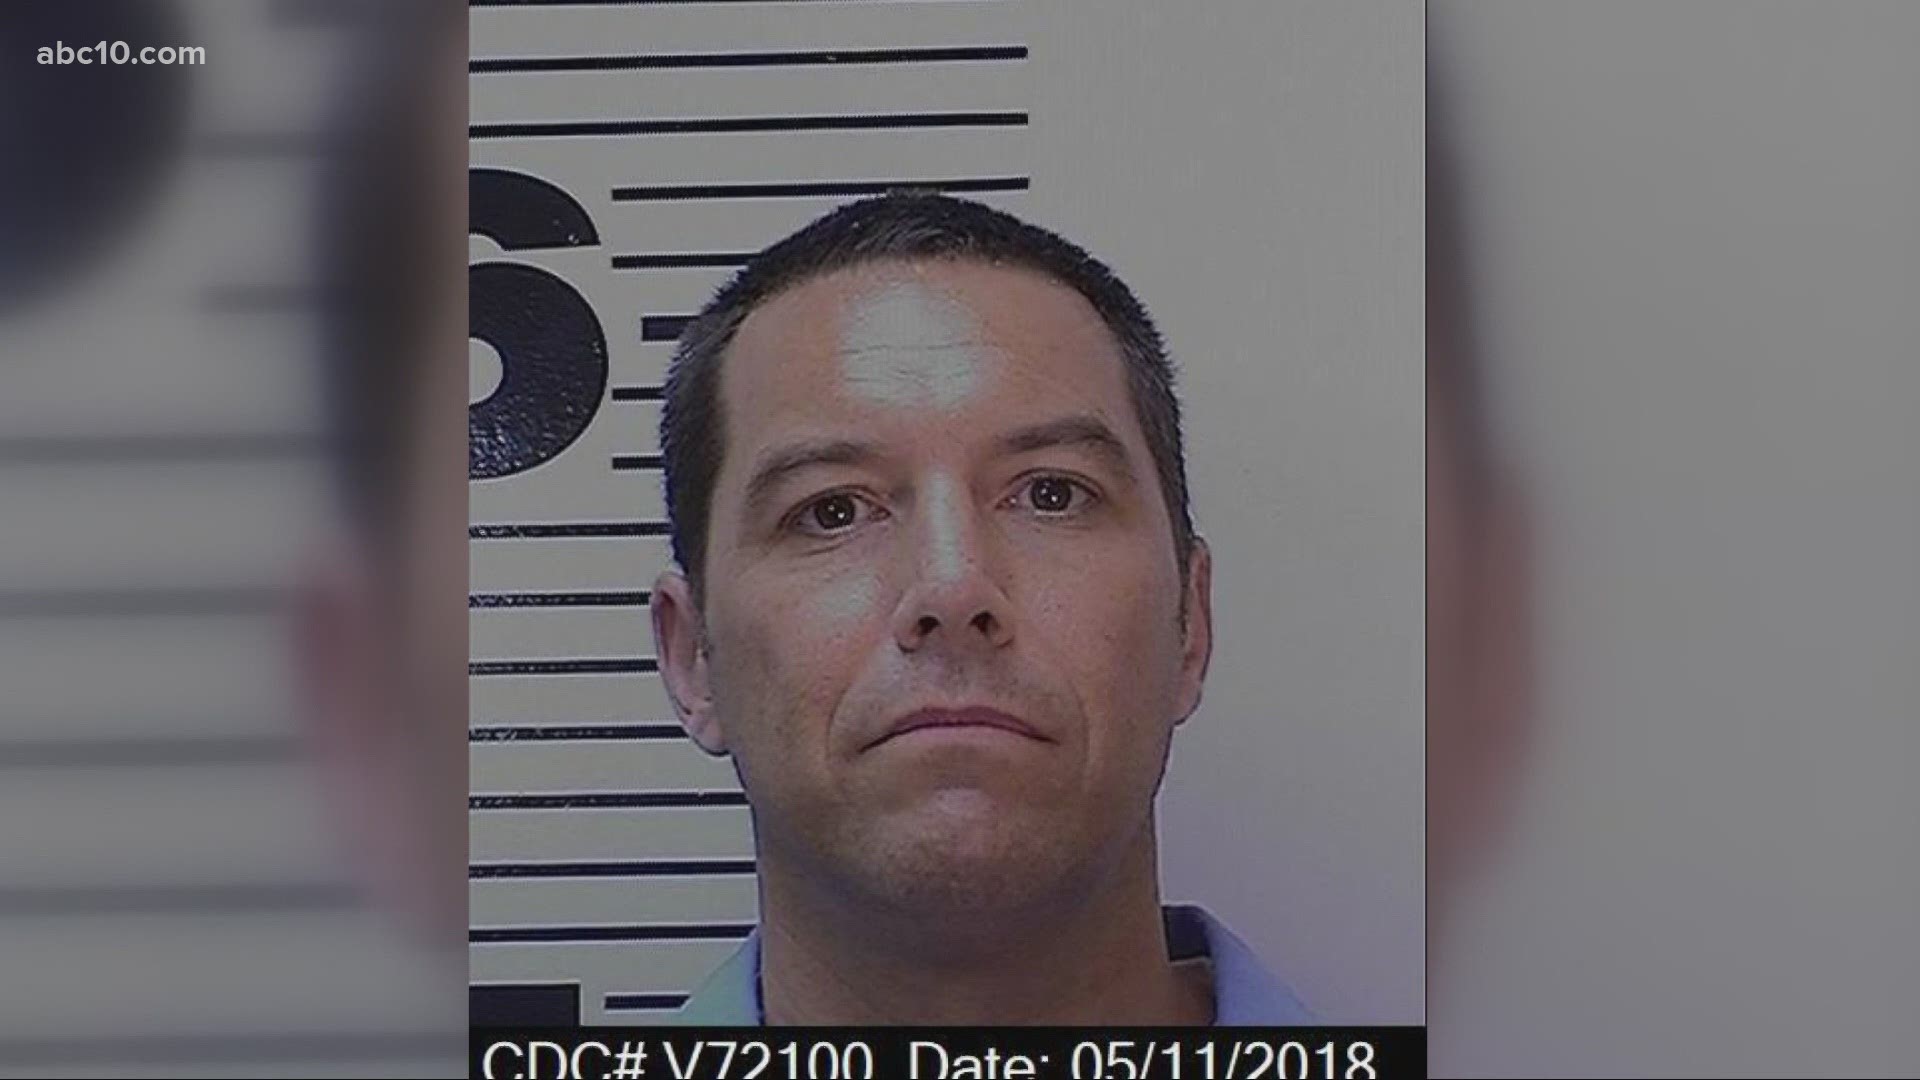 Northern California prosecutors will again seek the death penalty for Scott Peterson in the slaying of his pregnant wife and unborn son nearly 19 years ago.